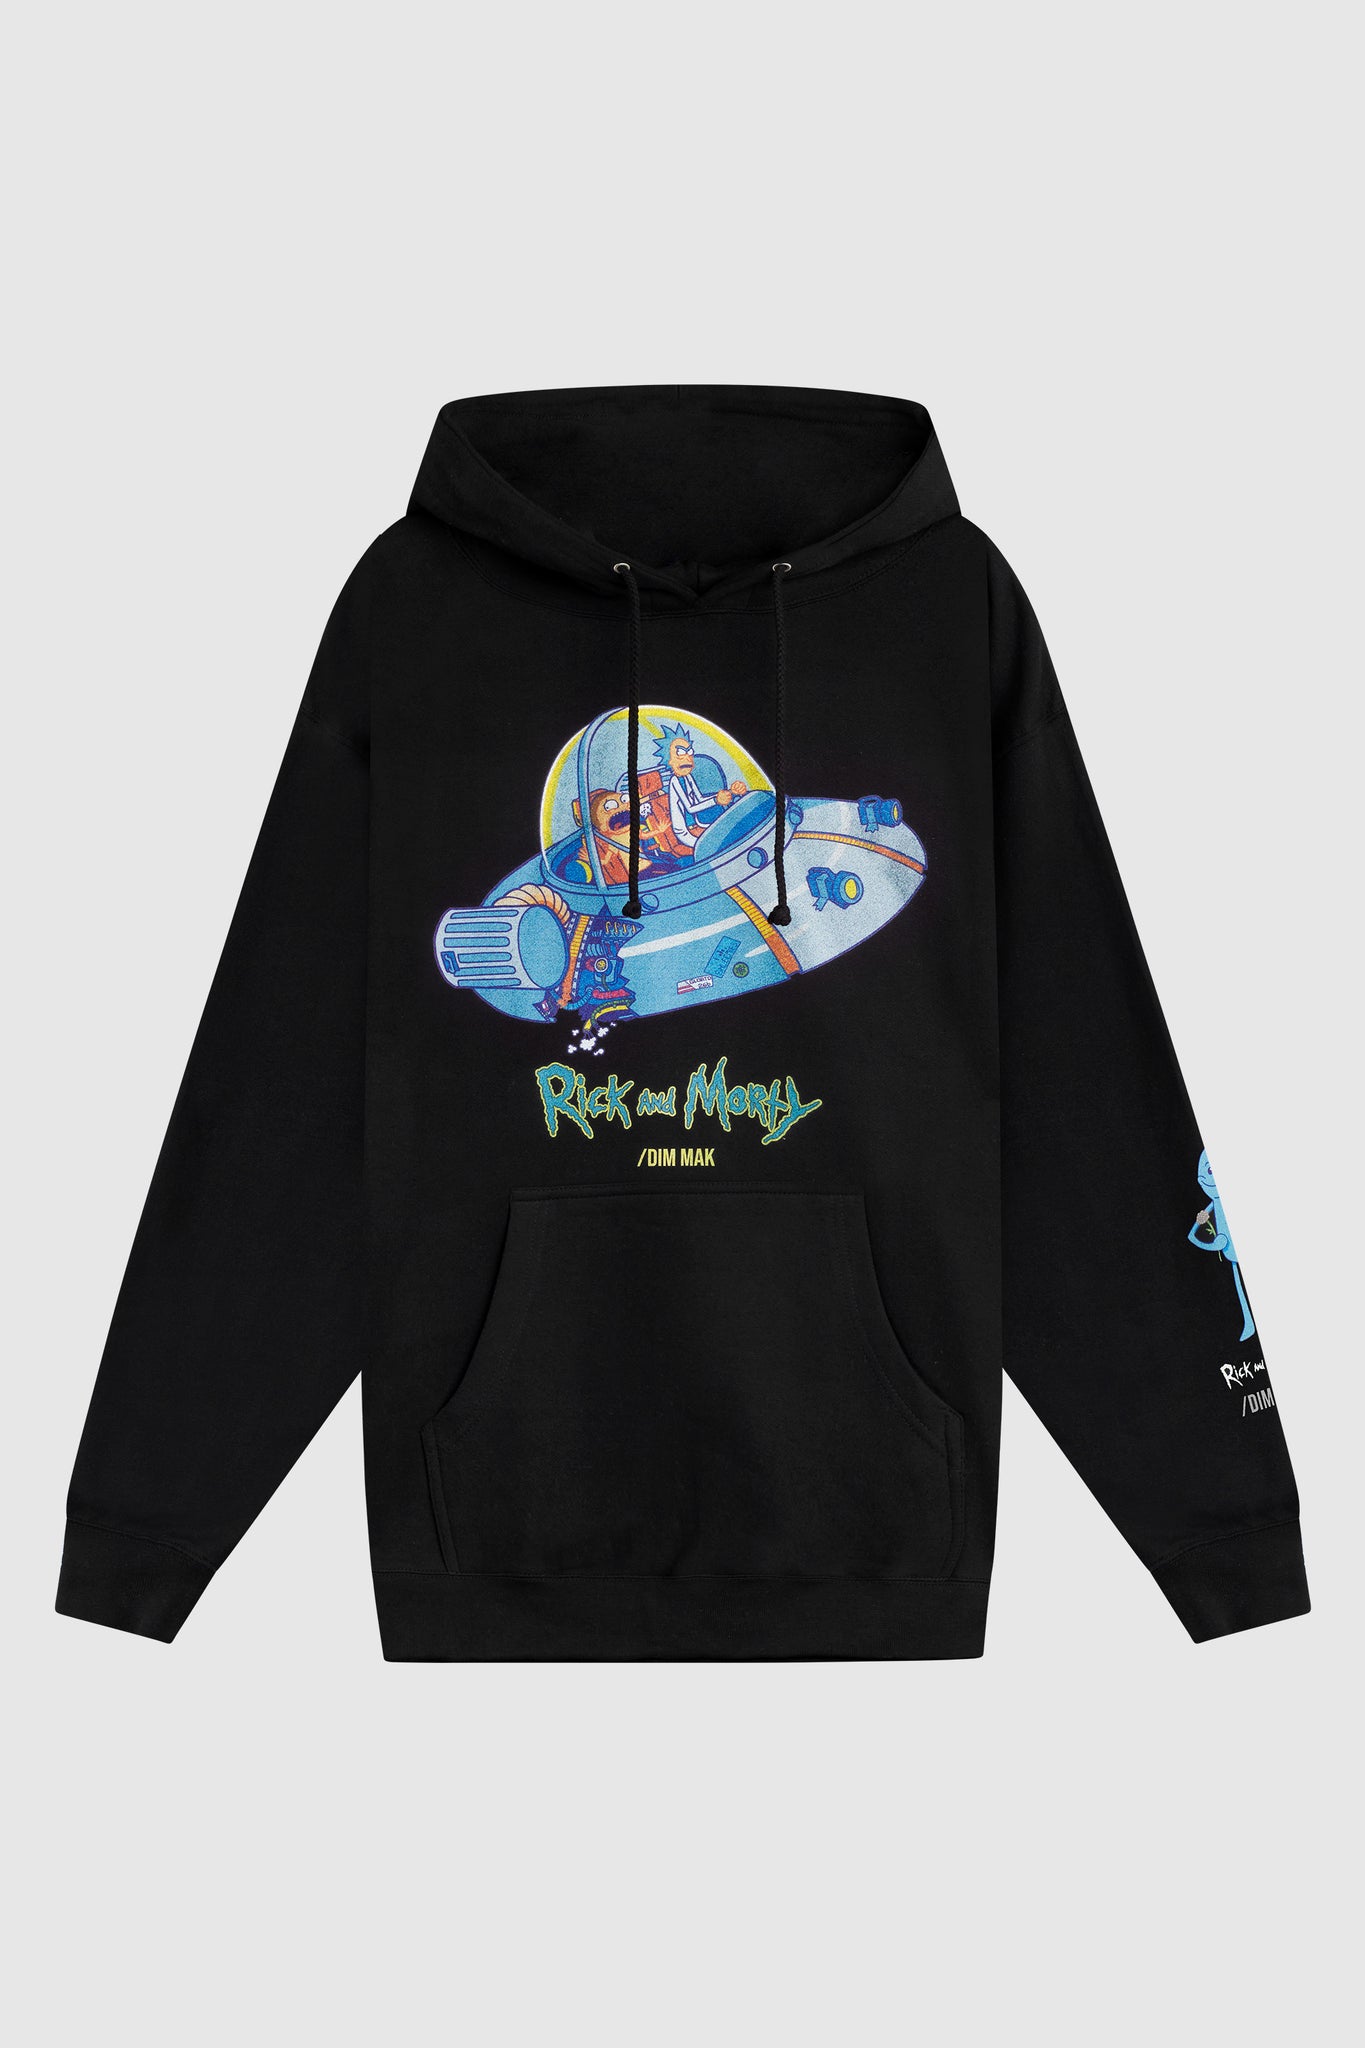 DIM MAK x RICK AND MORTY - Rest and Ricklaxation Hoodie - Black